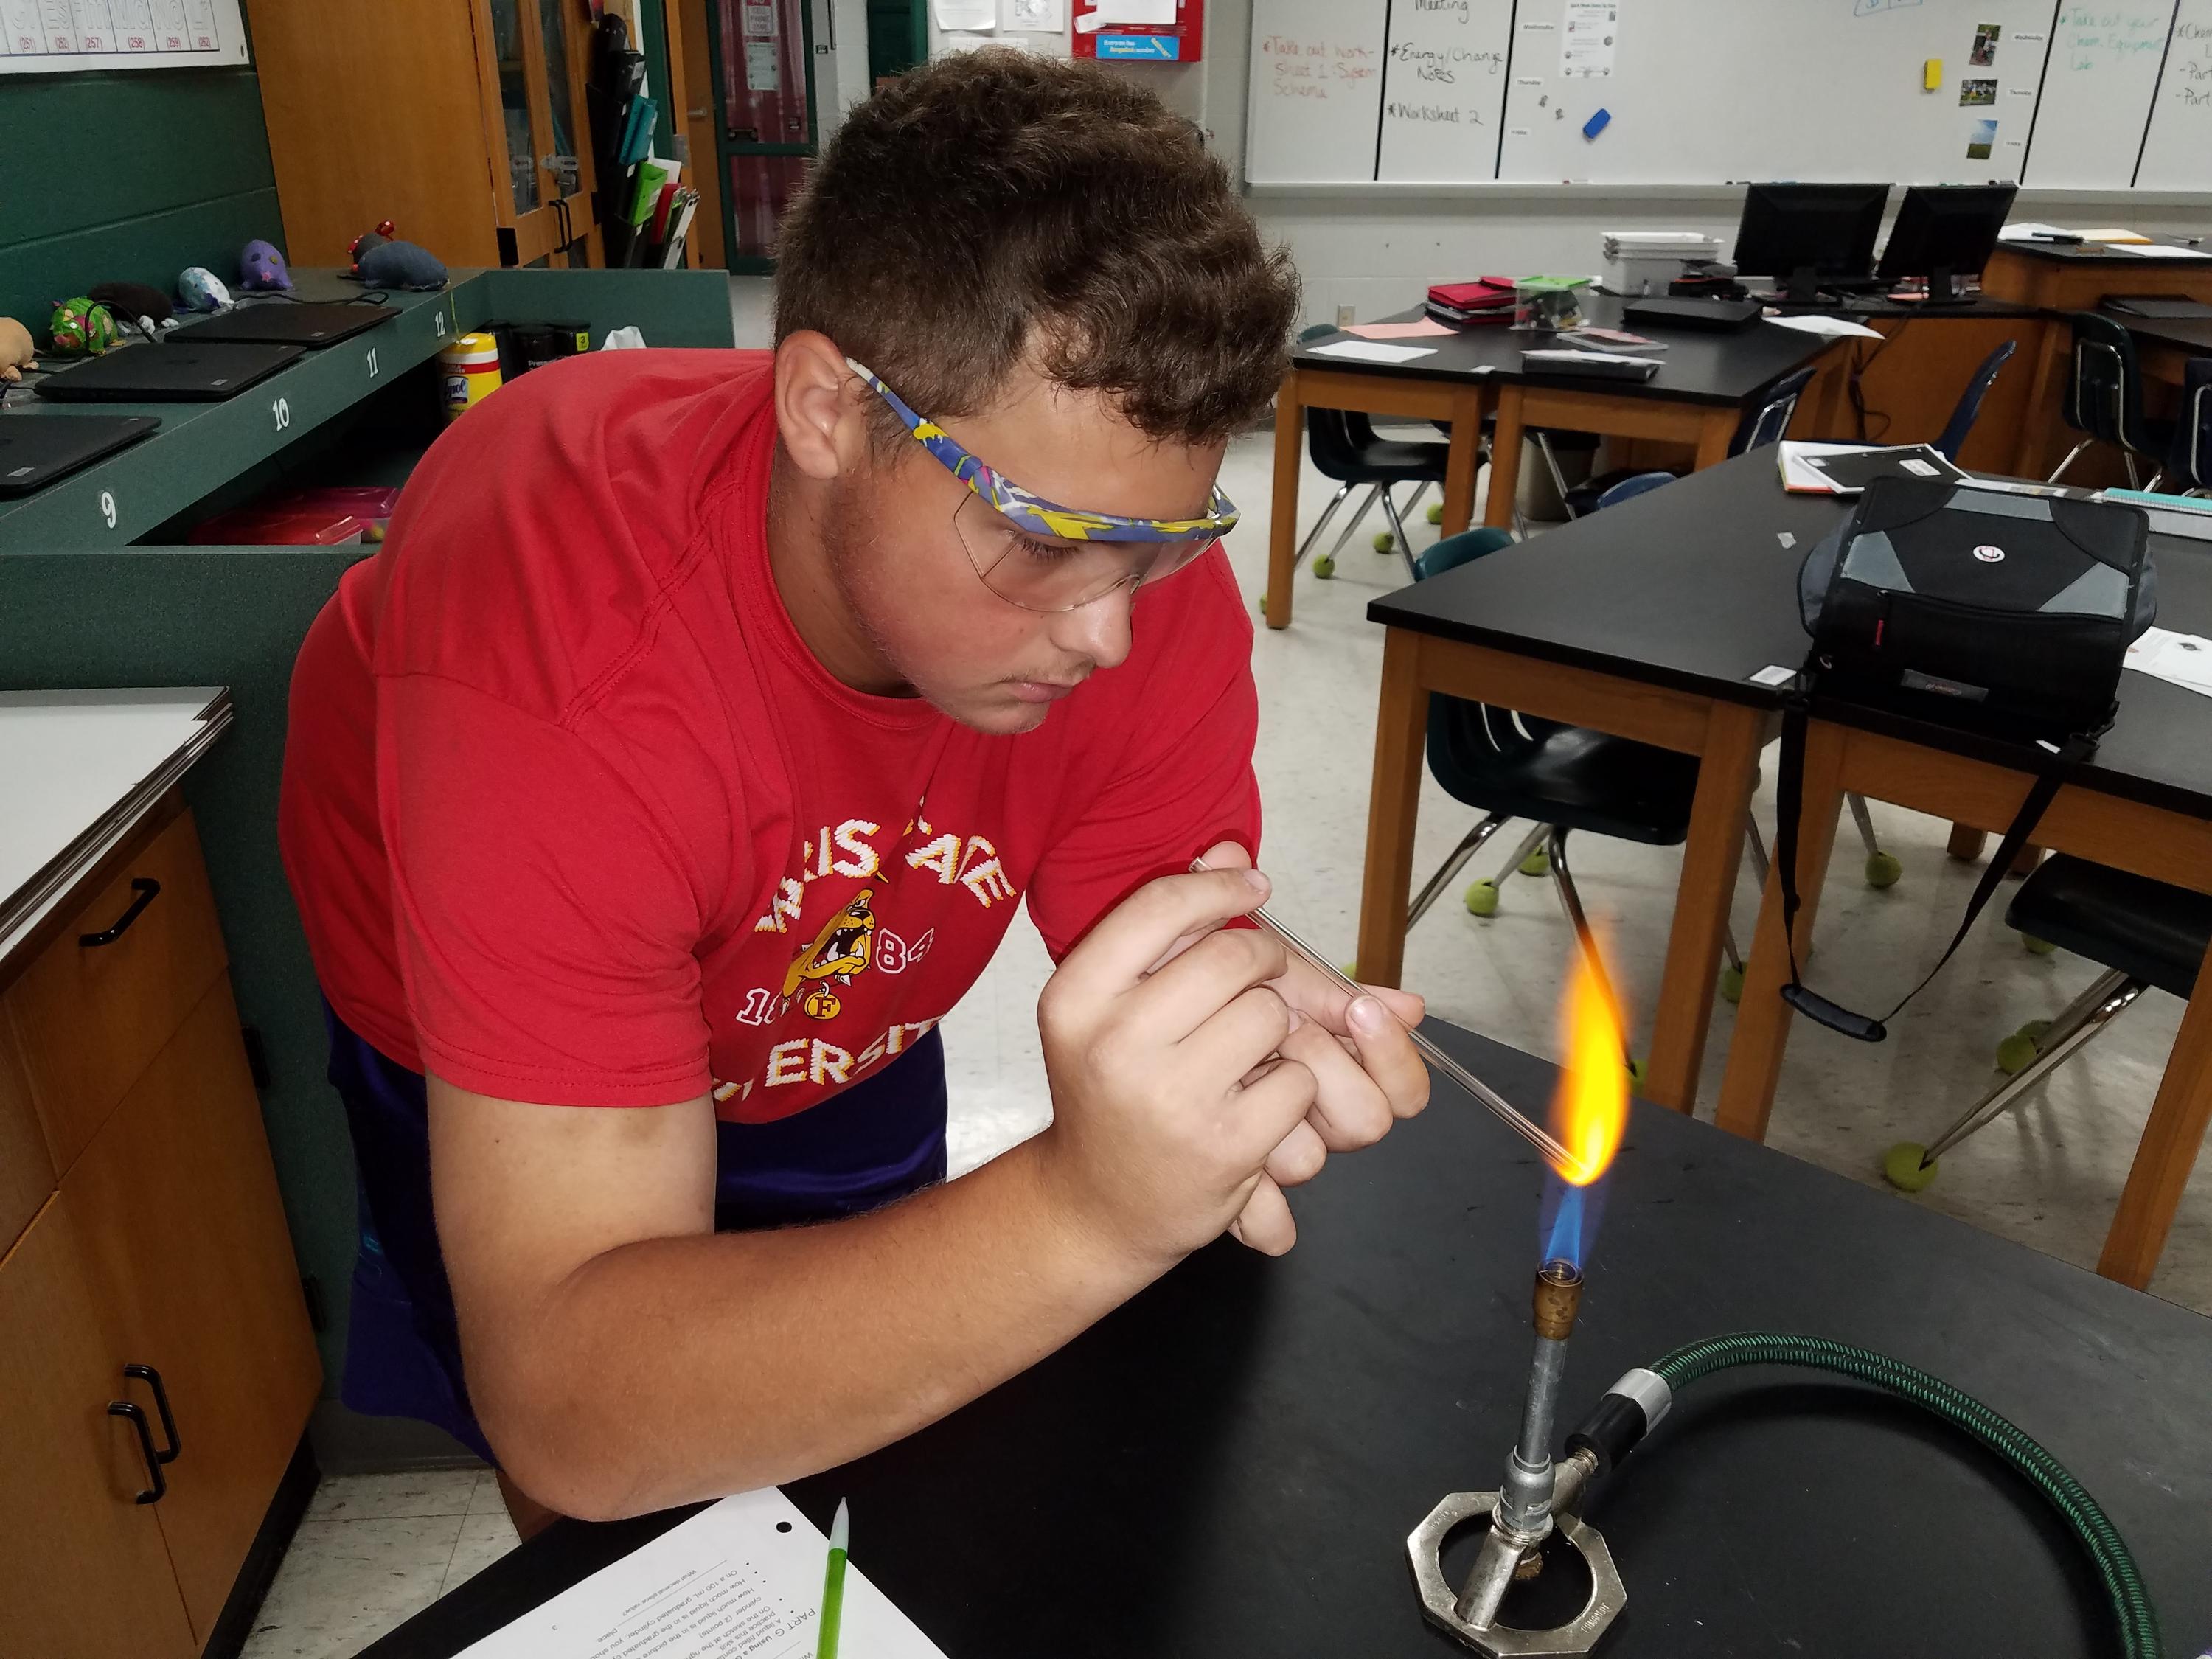 A boy holding a glass rod into the tip of the blue cone of the flame of a Bunsen burner at a 45 degree angle - the flame is bright yellow